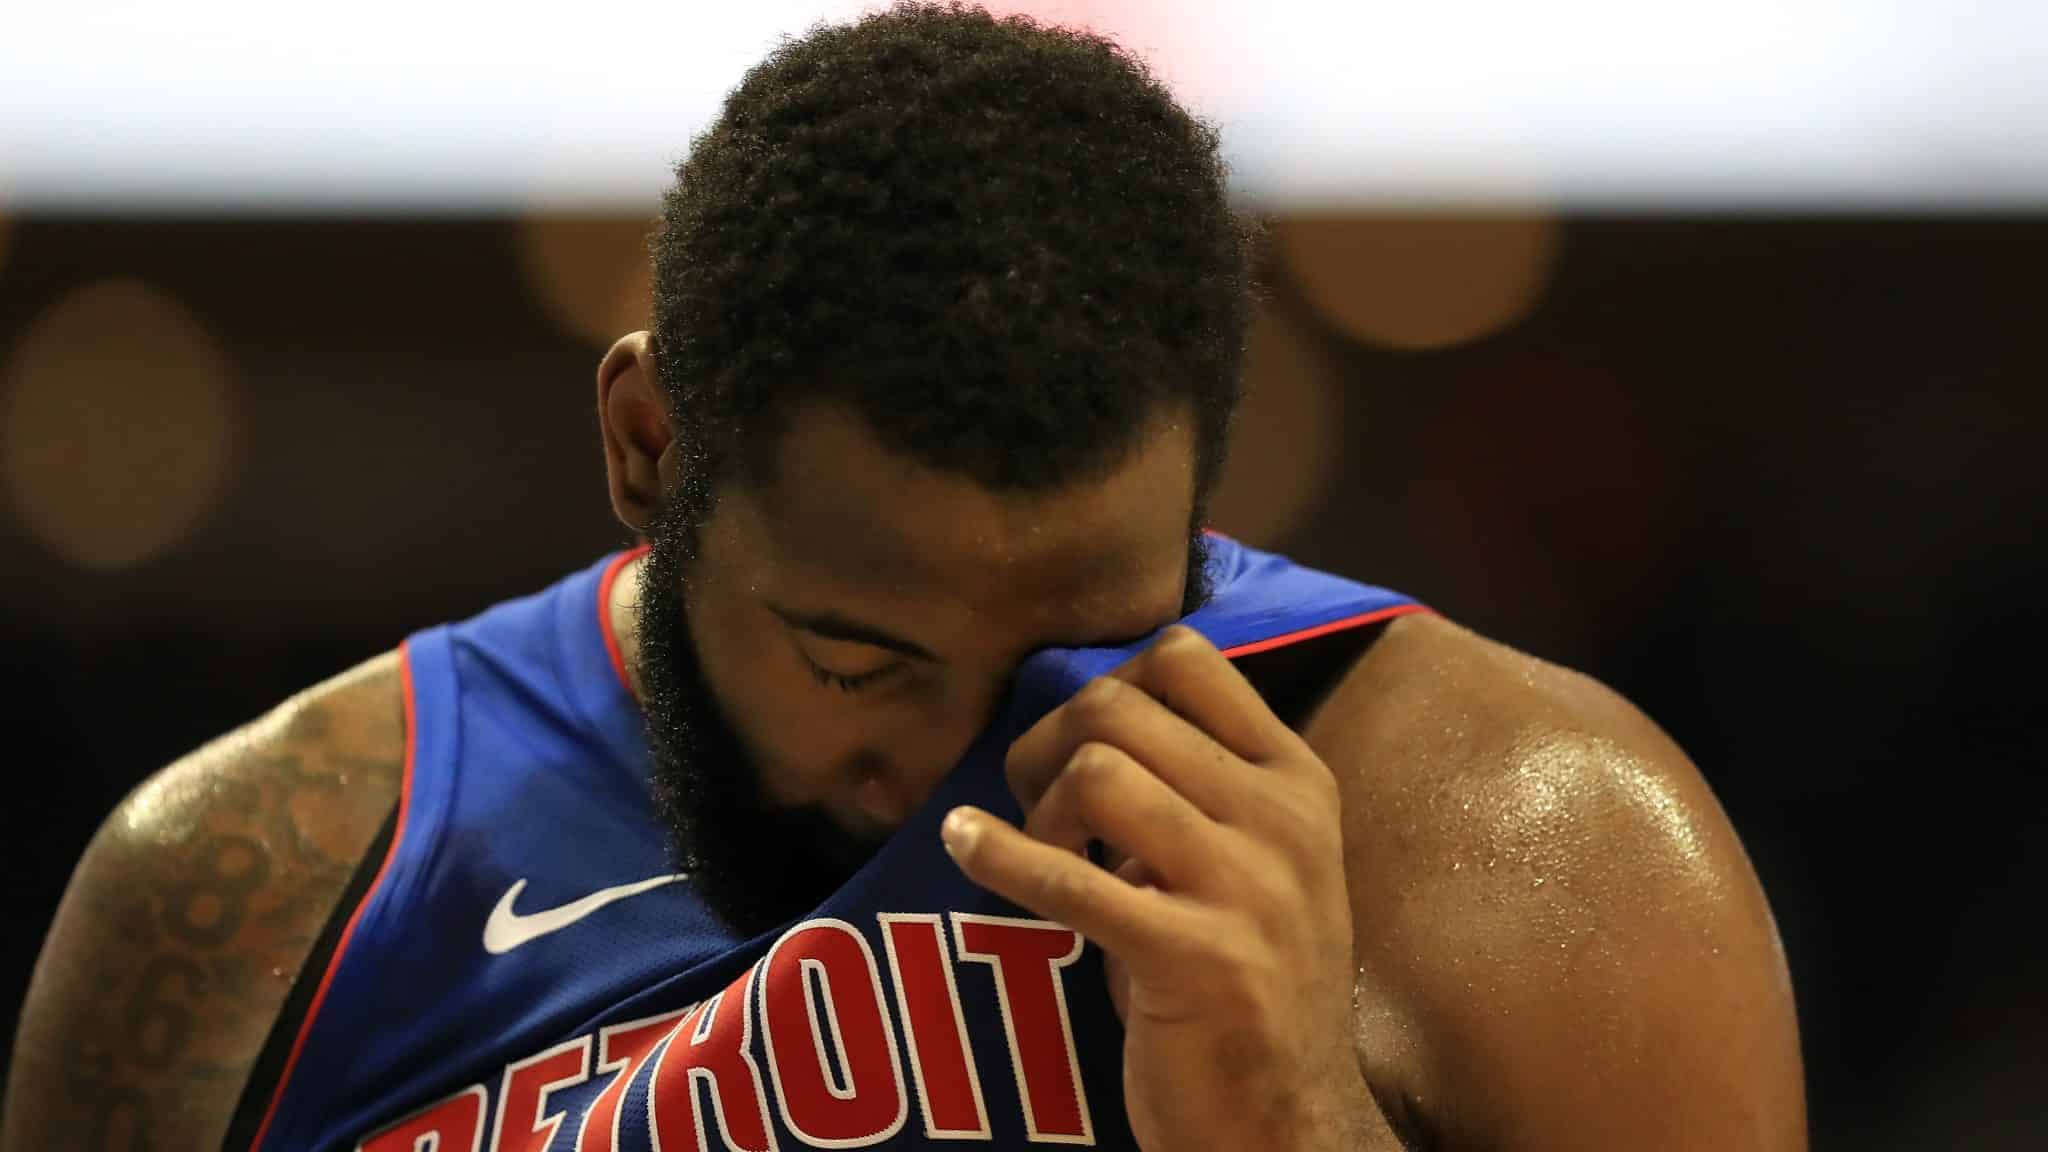 CHARLOTTE, NORTH CAROLINA - OCTOBER 16: Andre Drummond #0 of the Detroit Pistons during their game at Spectrum Center on October 16, 2019 in Charlotte, North Carolina. NOTE TO USER: User expressly acknowledges and agrees that, by downloading and or using this photograph, User is consenting to the terms and conditions of the Getty Images License Agreement.